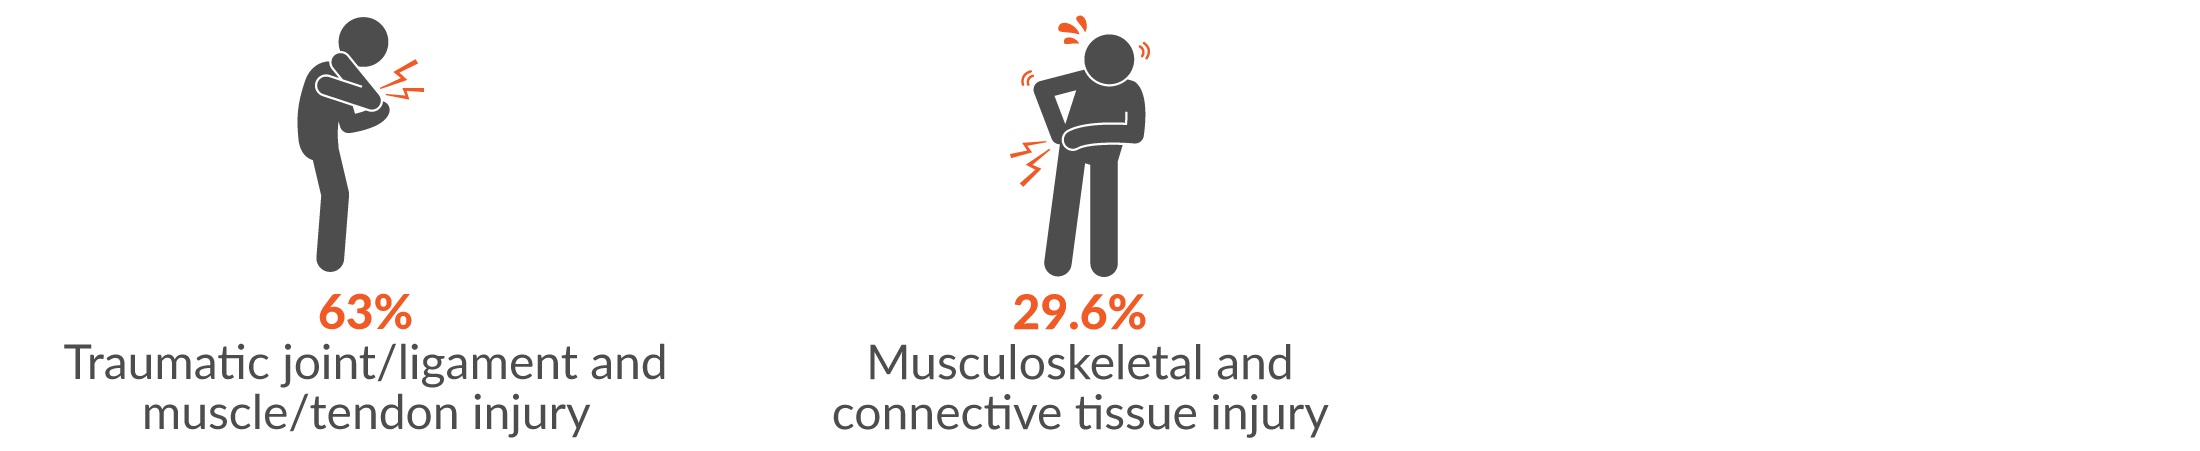 63% traumatic joint/ligament and muscle/tendon injury; and 29.6% musculoskeletal and connective tissue injury.